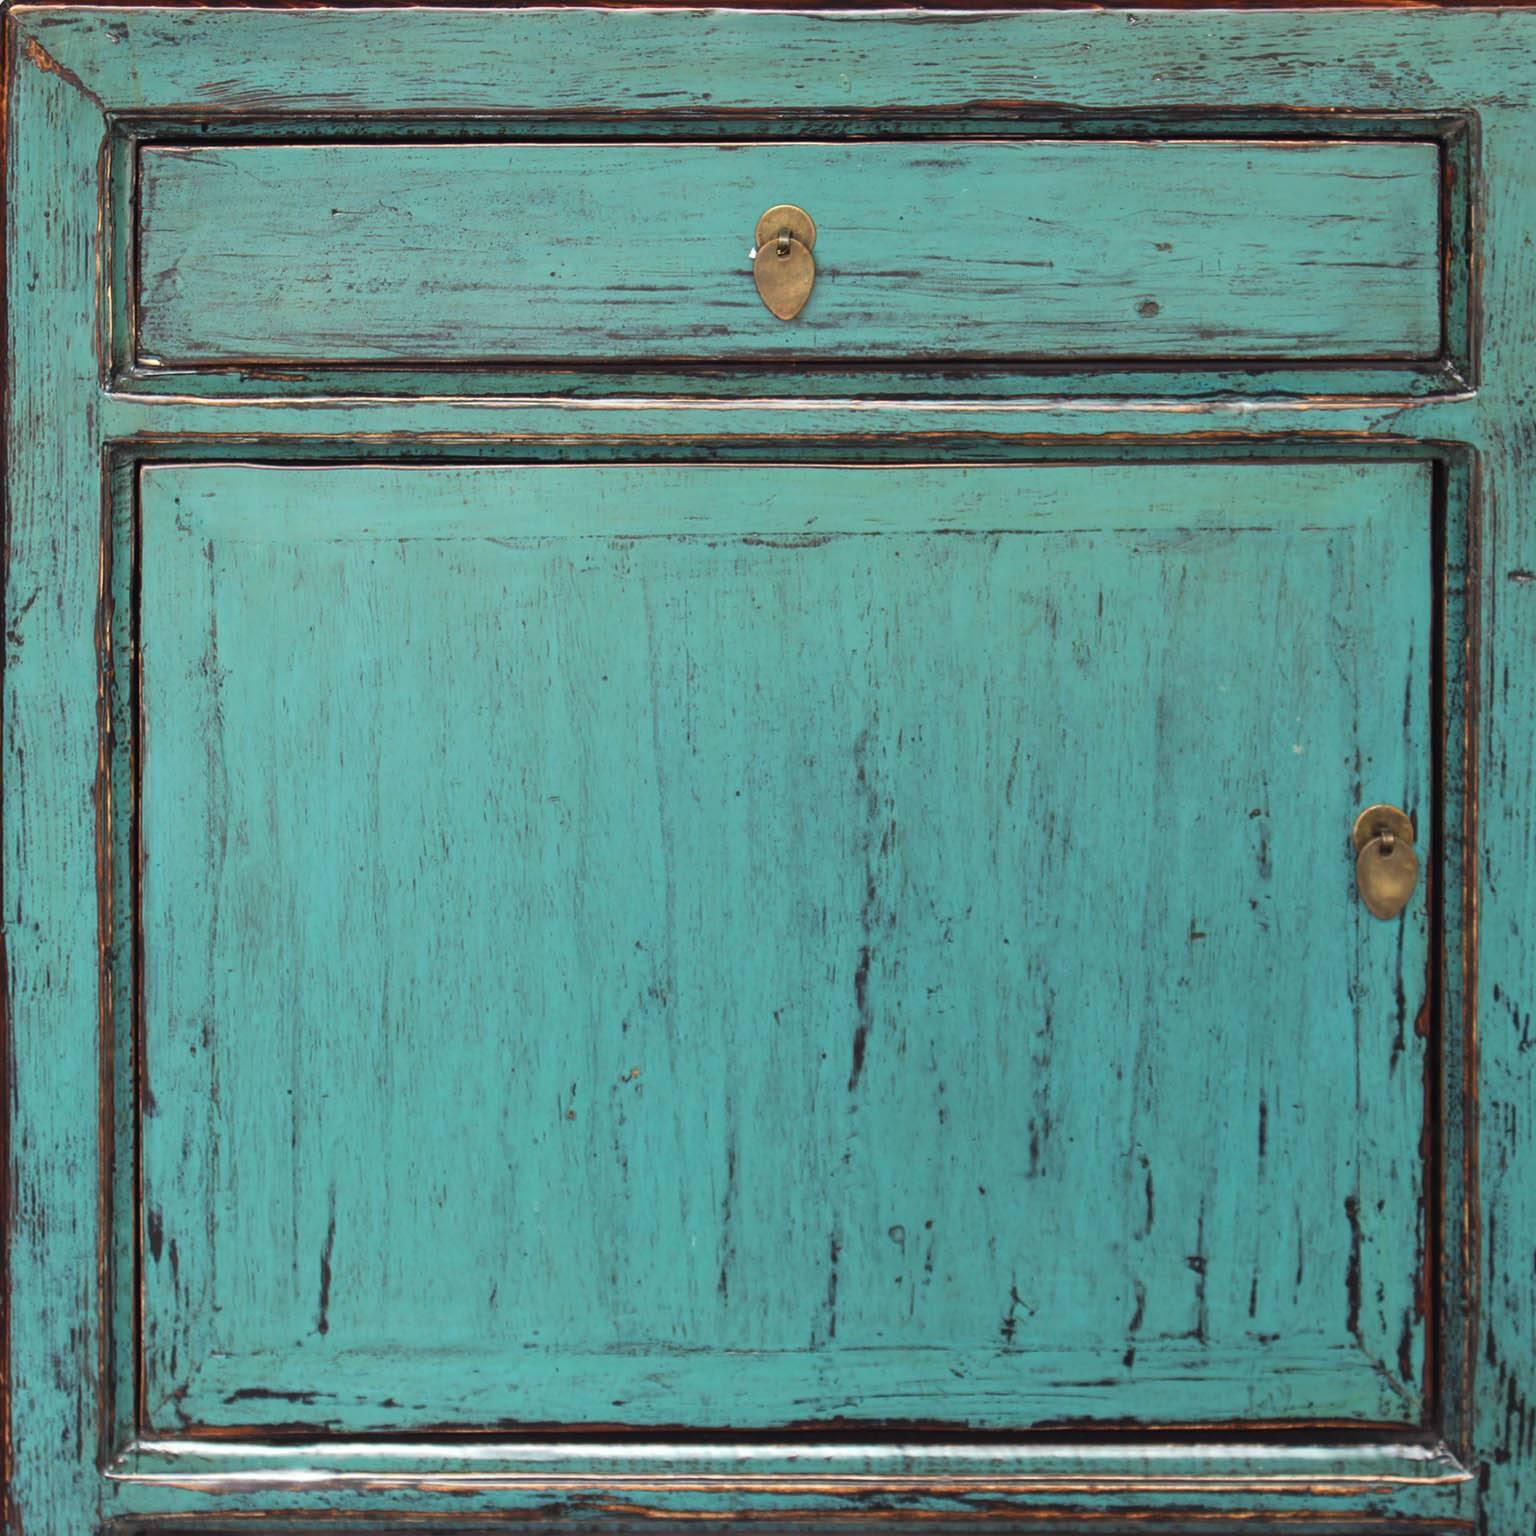 Chinese Turquoise Sideboard